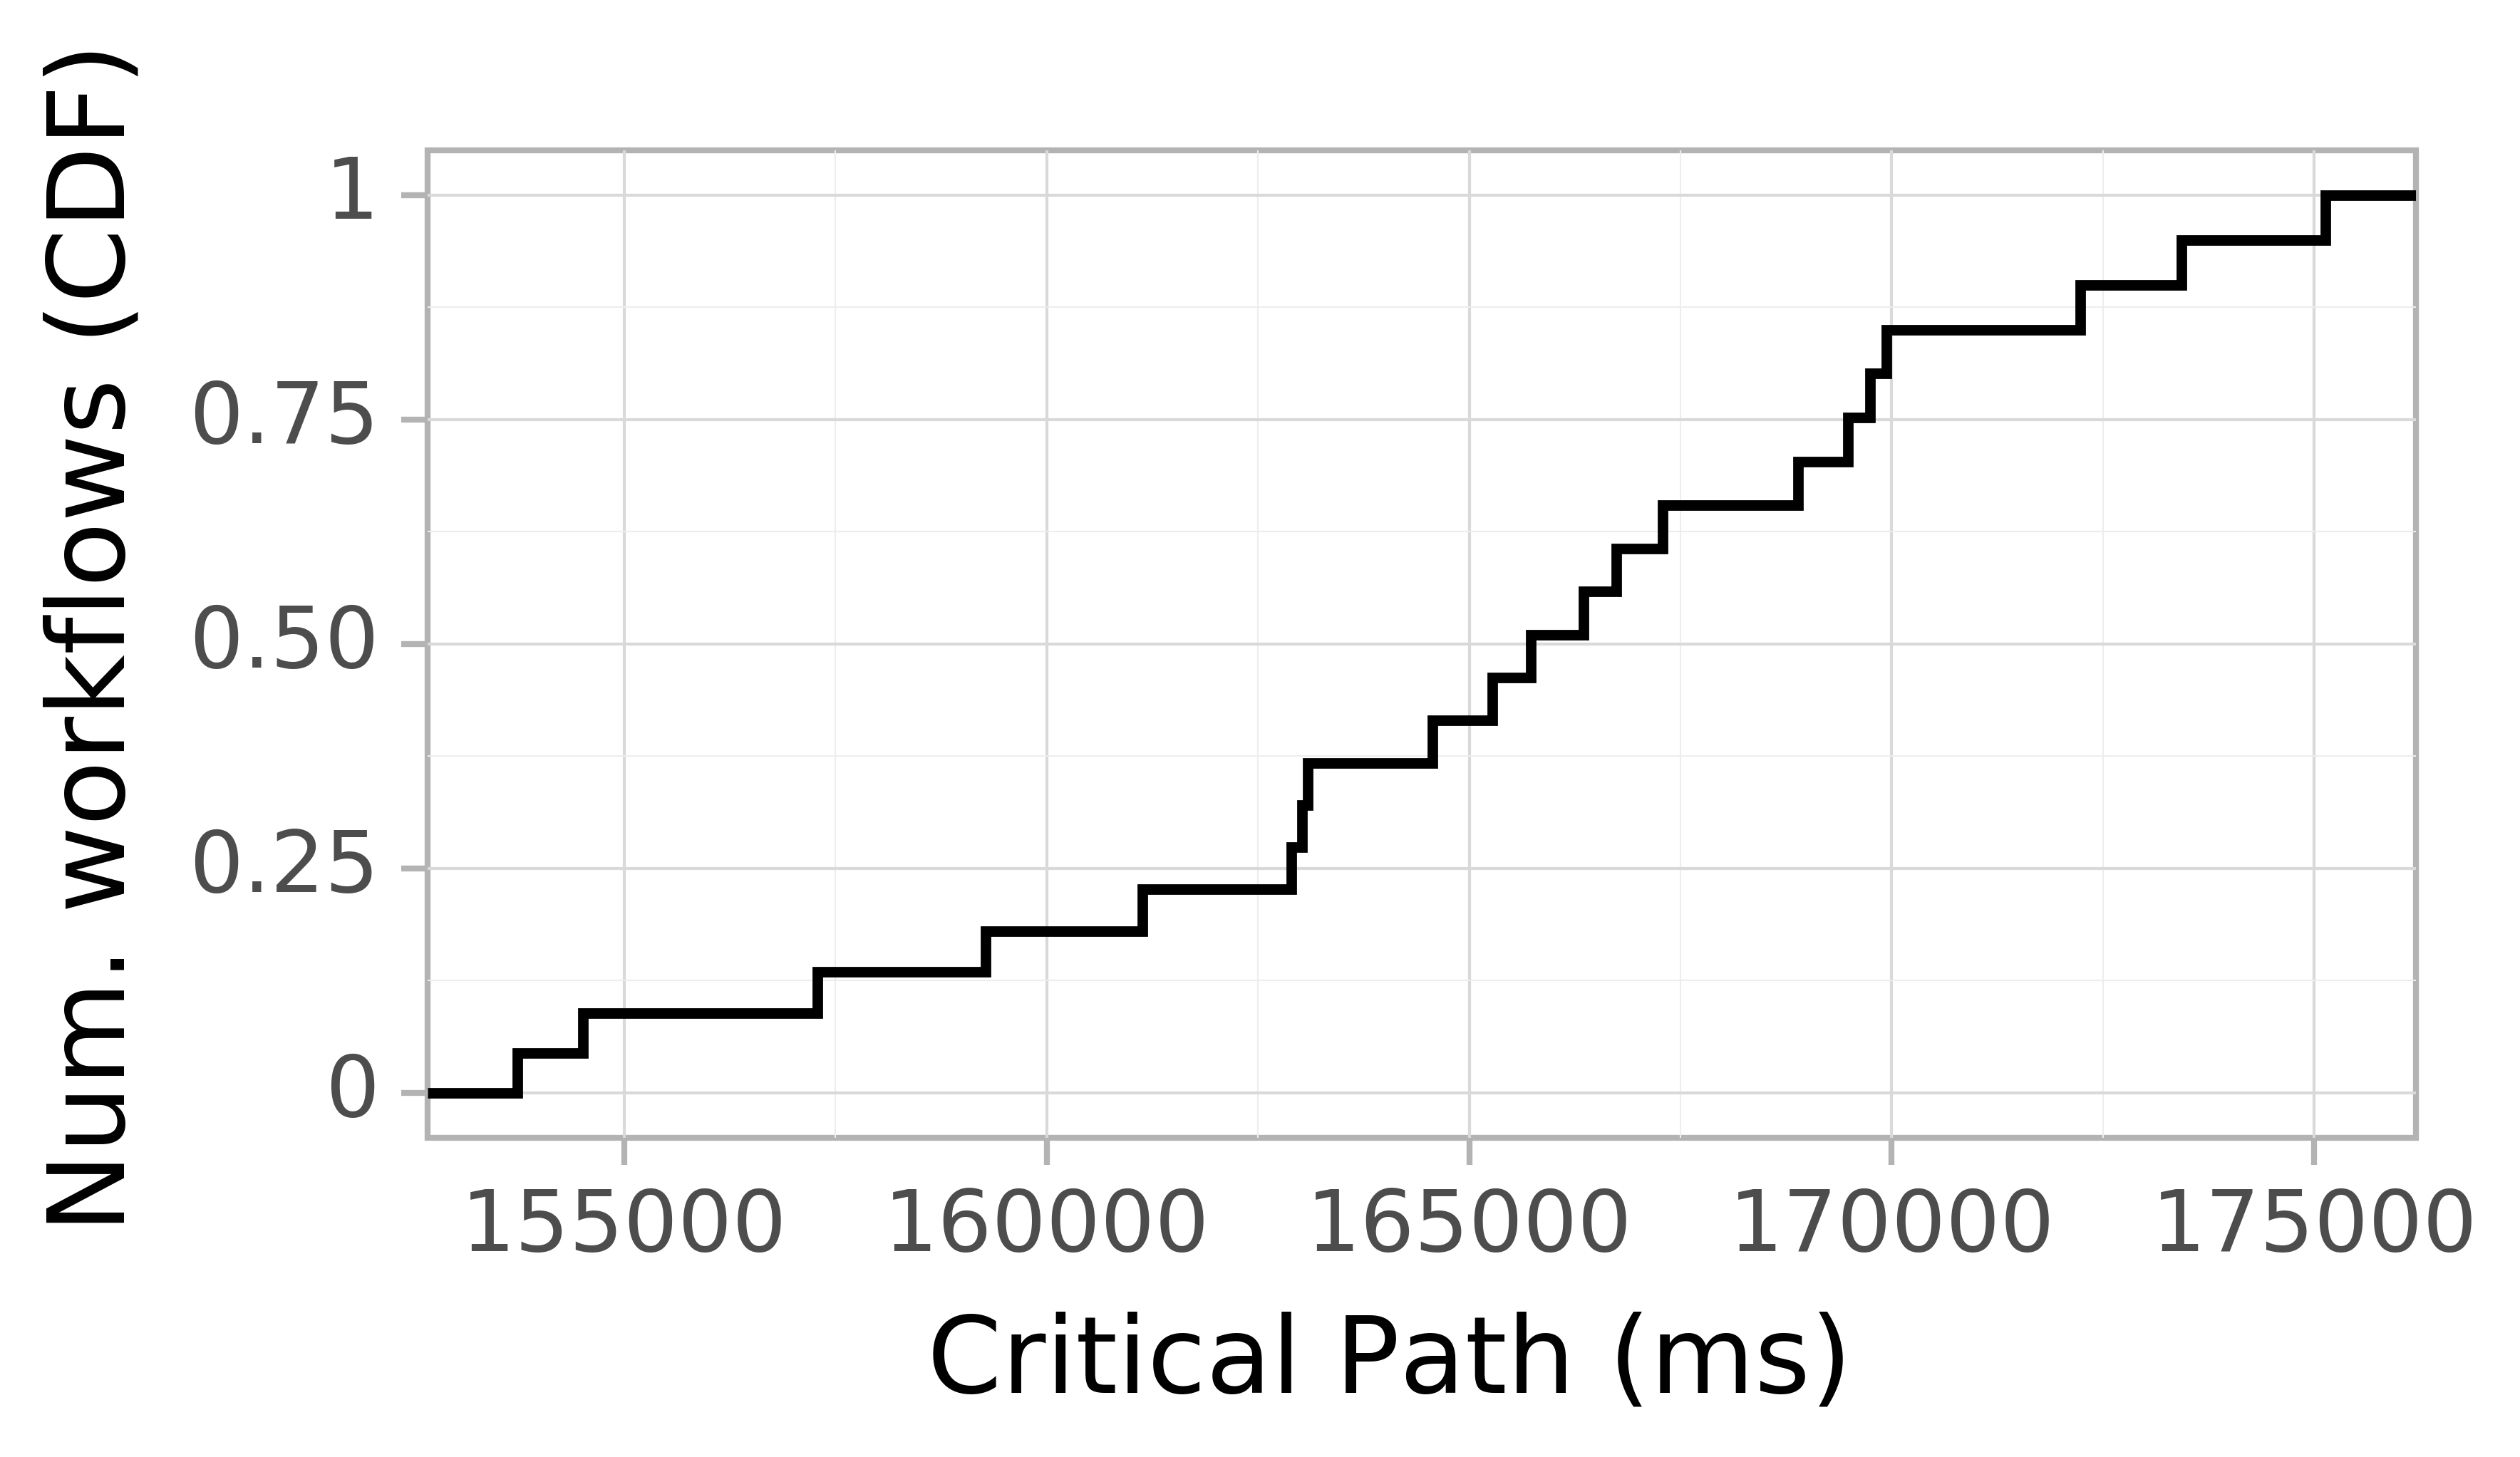 Job runtime CDF graph for the askalon-new_ee63 trace.